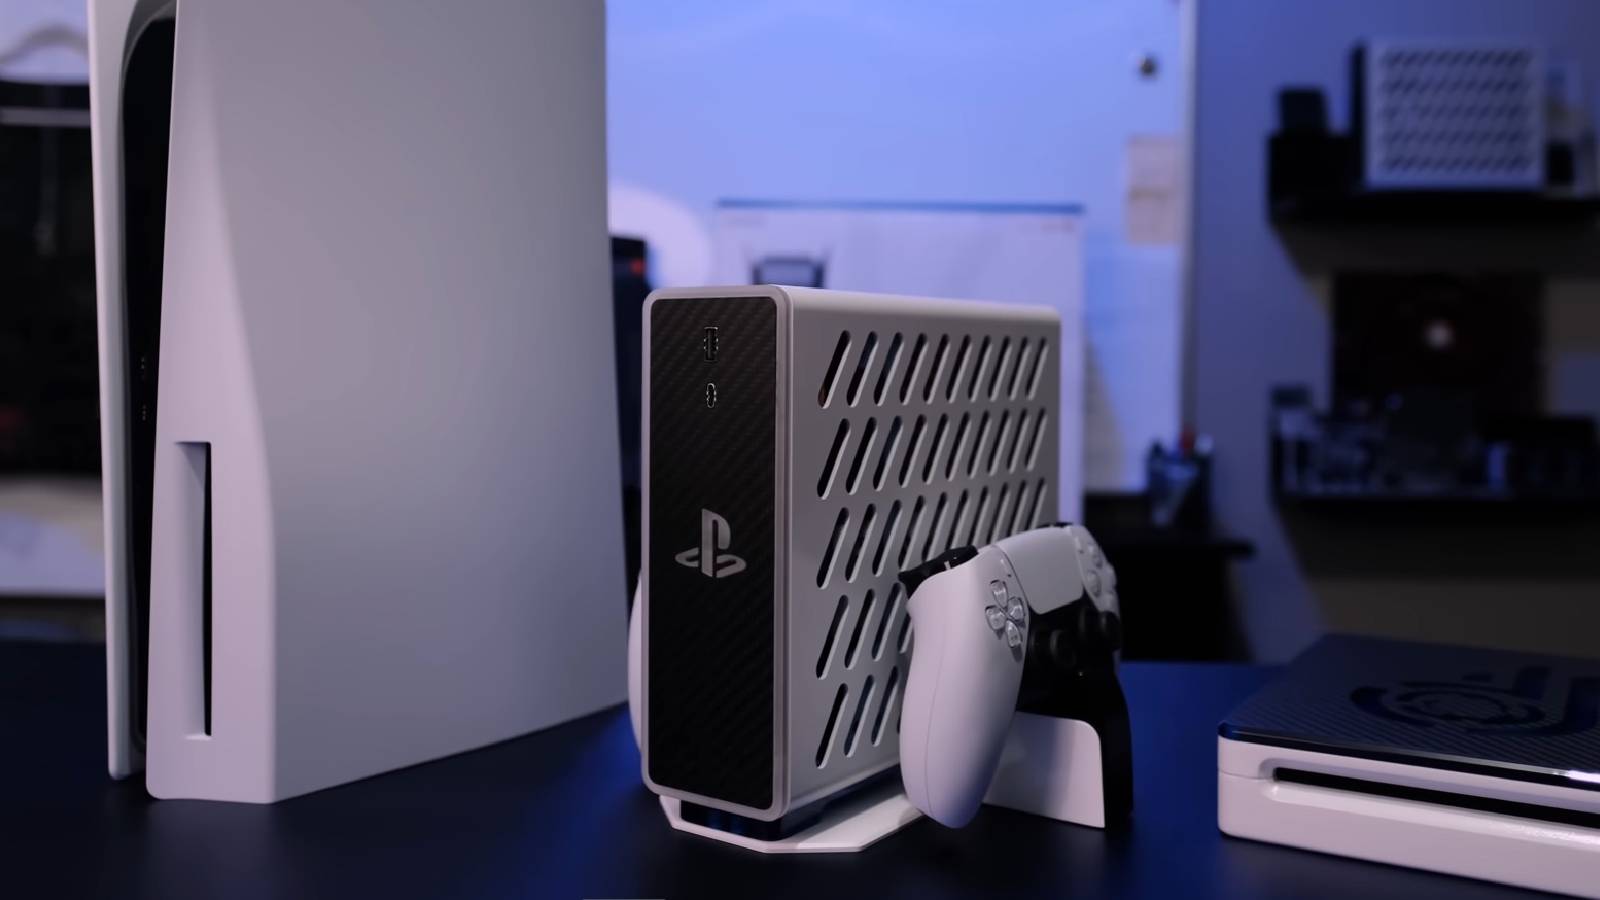 Engineer builds tiny PS5 that looks like a souped-up Wii - Dexerto